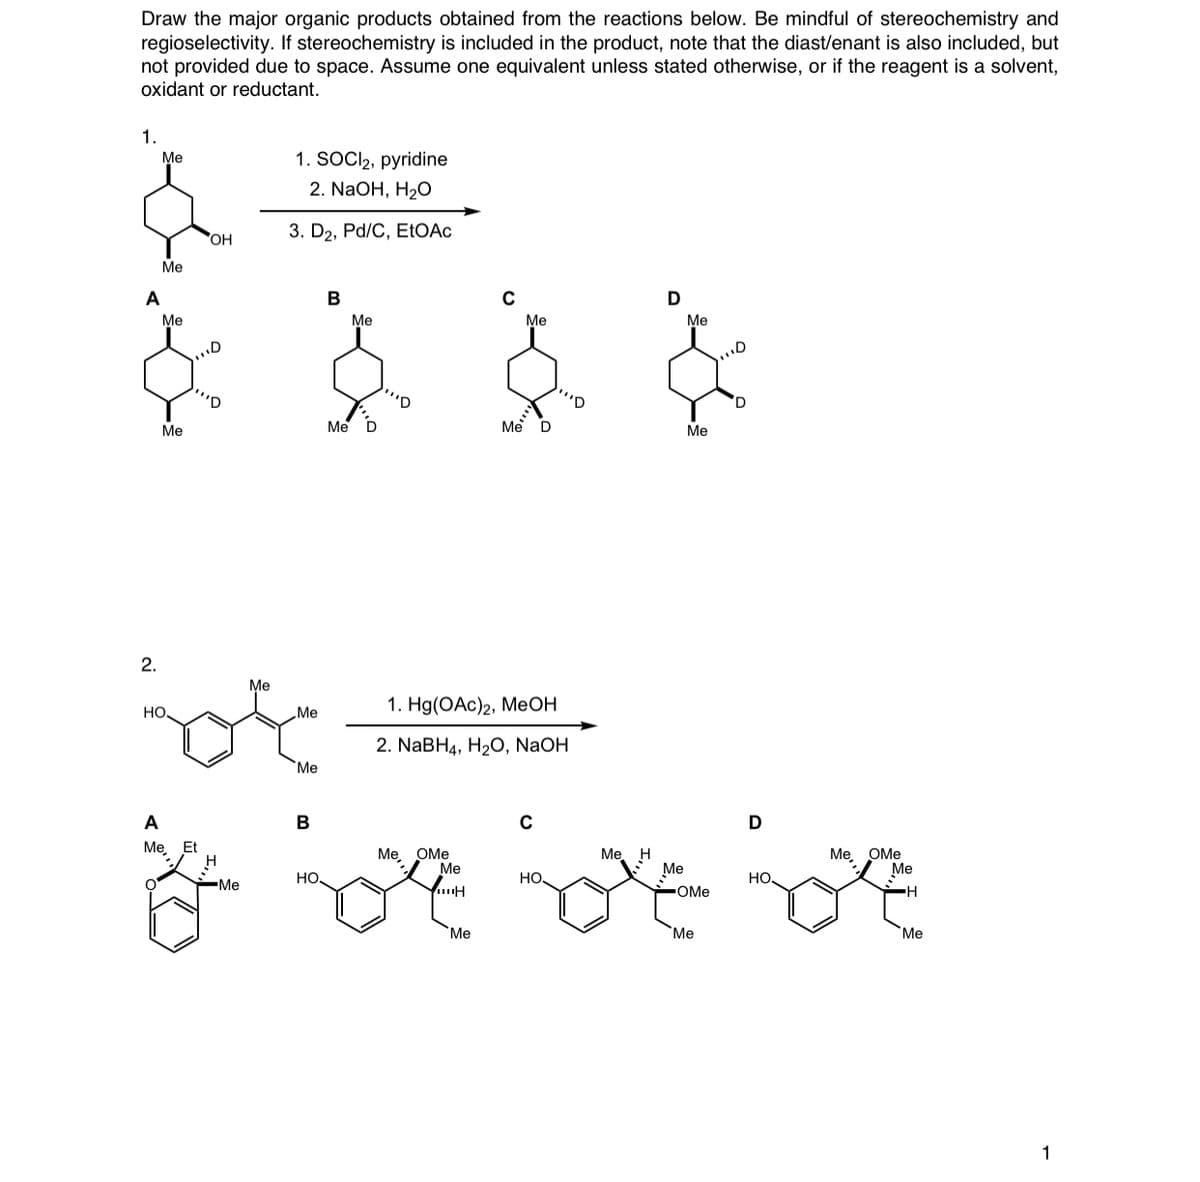 Draw the major organic products obtained from the reactions below. Be mindful of stereochemistry and
regioselectivity. If stereochemistry is included in the product, note that the diast/enant is also included, but
not provided due to space. Assume one equivalent unless stated otherwise, or if the reagent is a solvent,
oxidant or reductant.
1.
Me
1. SOCI2, pyridine
2. NaOH, H2O
OH
3. D2, Pd/C, EtOAC
Ме
A
В
Me
Me
Me
Me
'D
'D
Me
Me D
Me D
Ме
2.
Me
но.
1. Hо(ОАc)2, МеОН
„Me
2. NABH4, H2O, NaOH
Me
A
В
Me, Et
Ме, ОМе
Me
Ме, Н
Ме
Ме, ОМе
Ме
но.
но
но
-Me
OMe
Me
Me
Me
1
